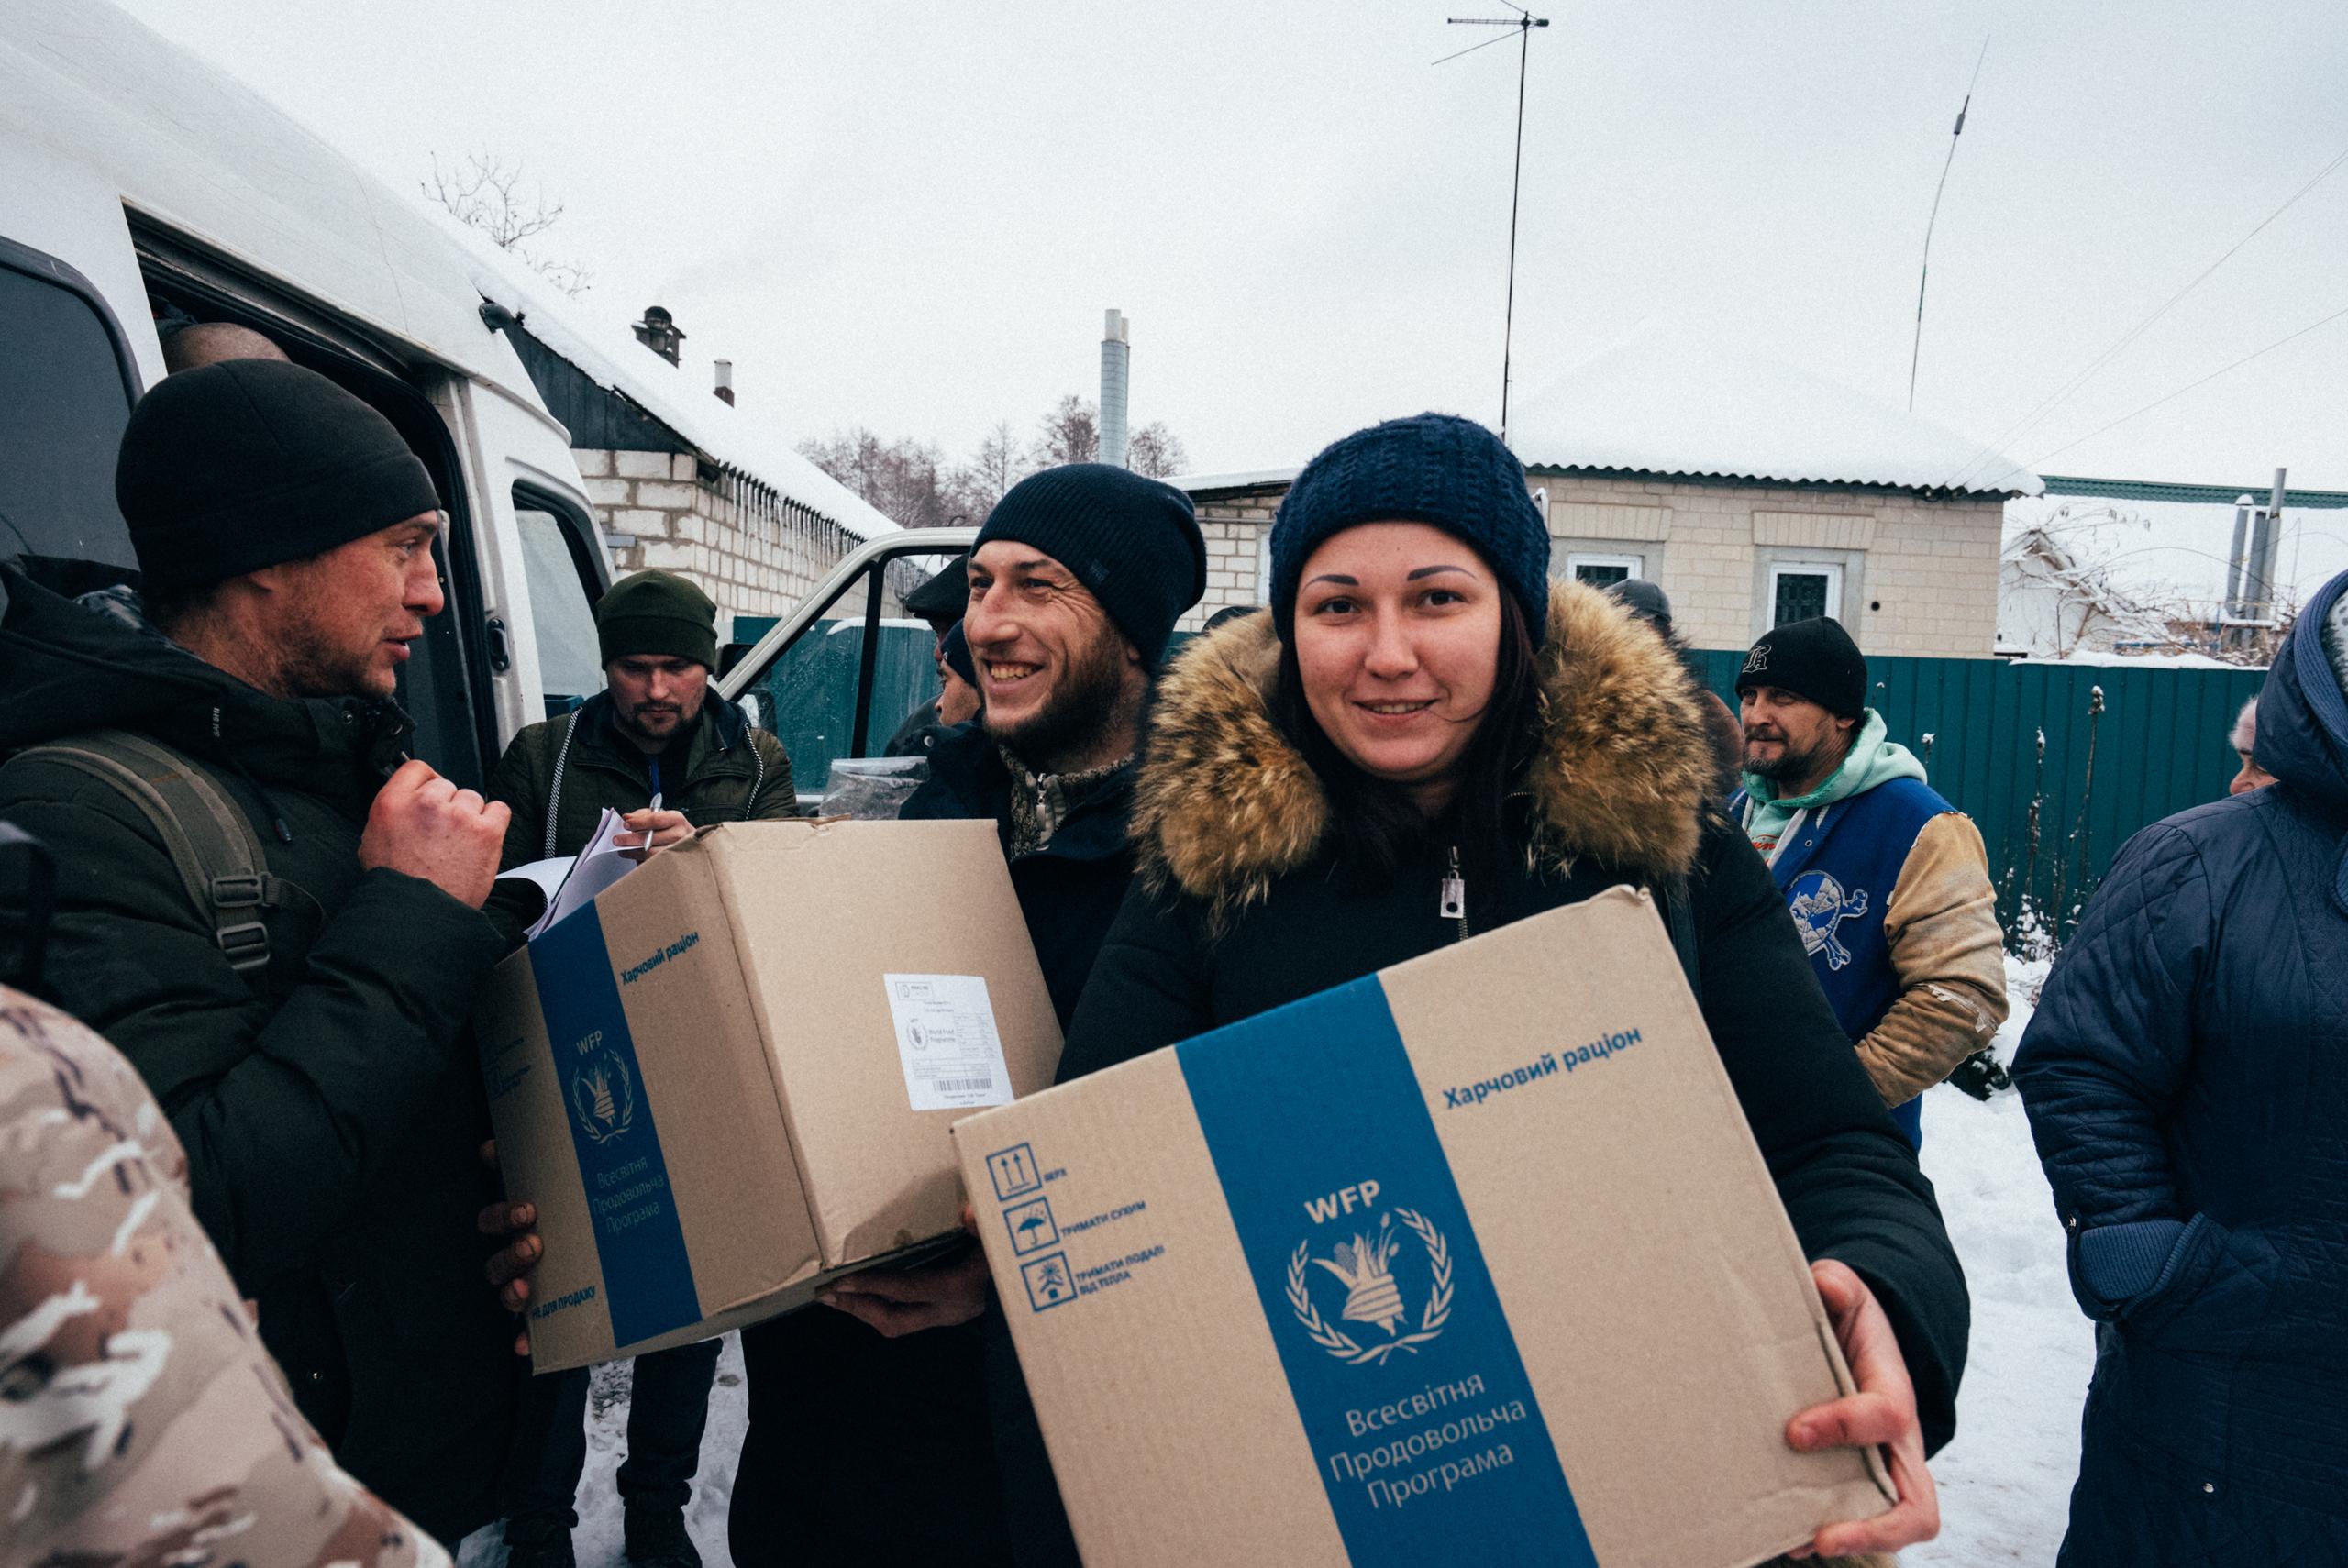 Man and woman holding a box of food rations smiling